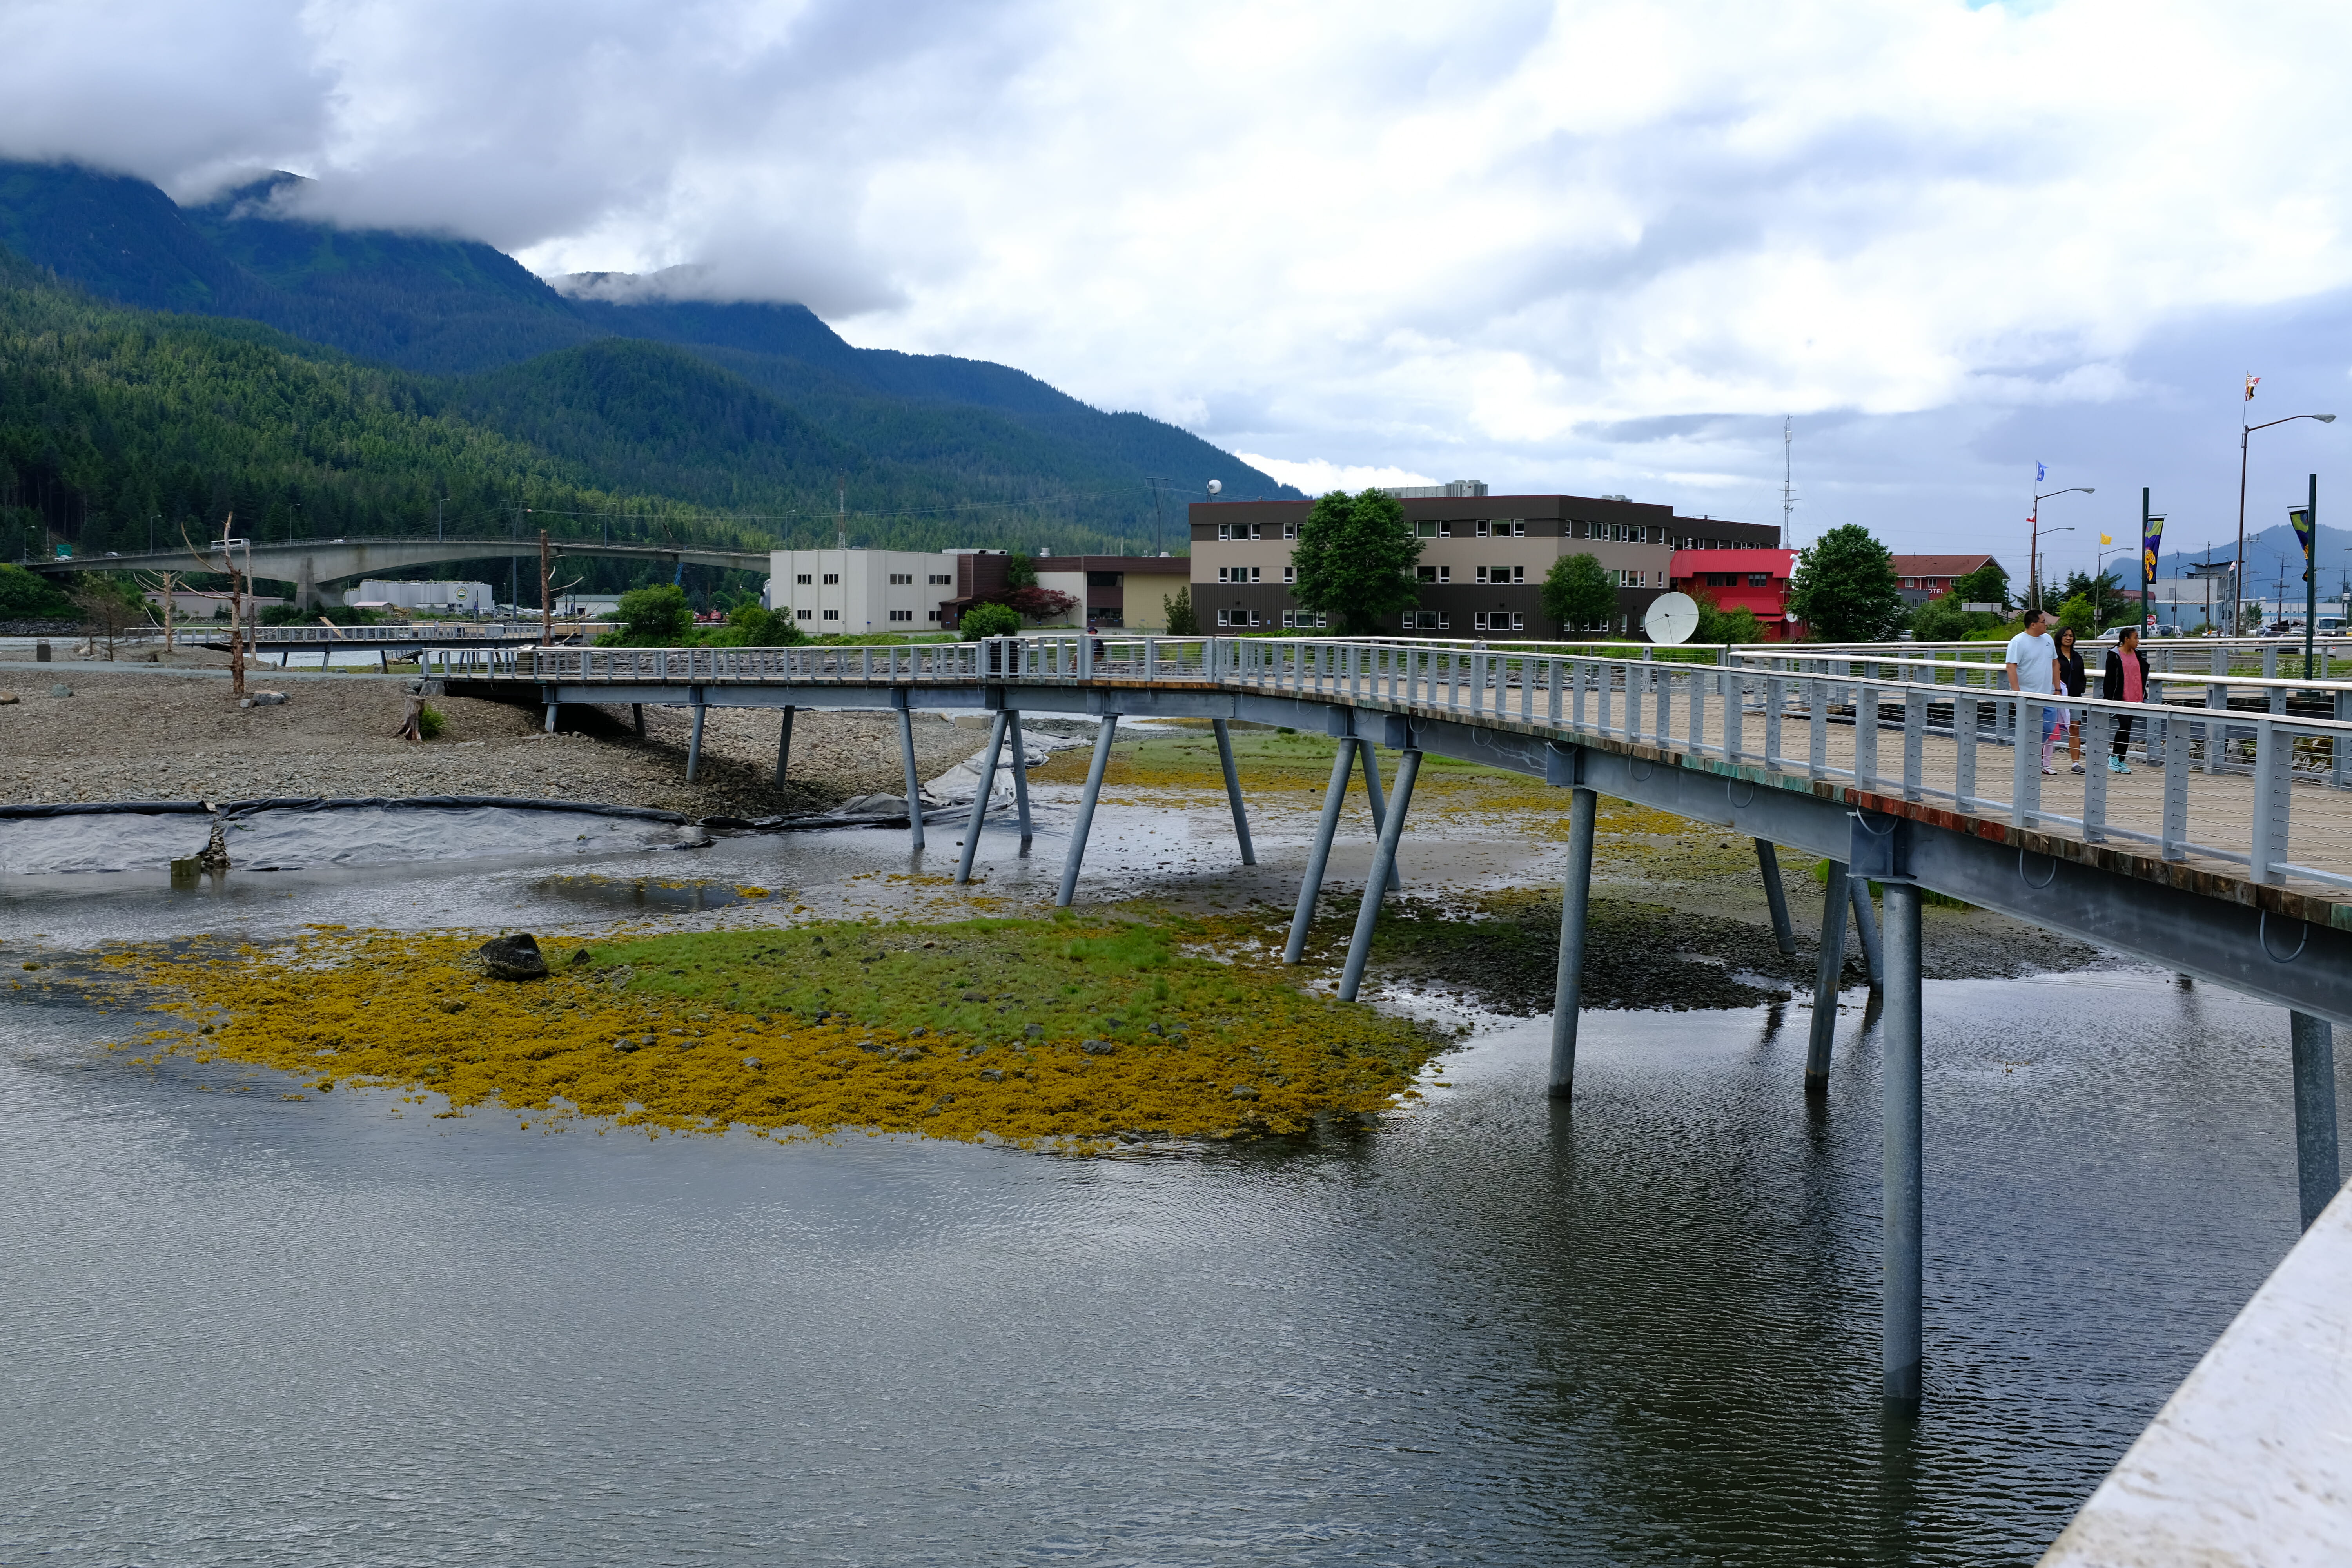 View of Sea Walk with Juneau-Douglas Bridge in the background.